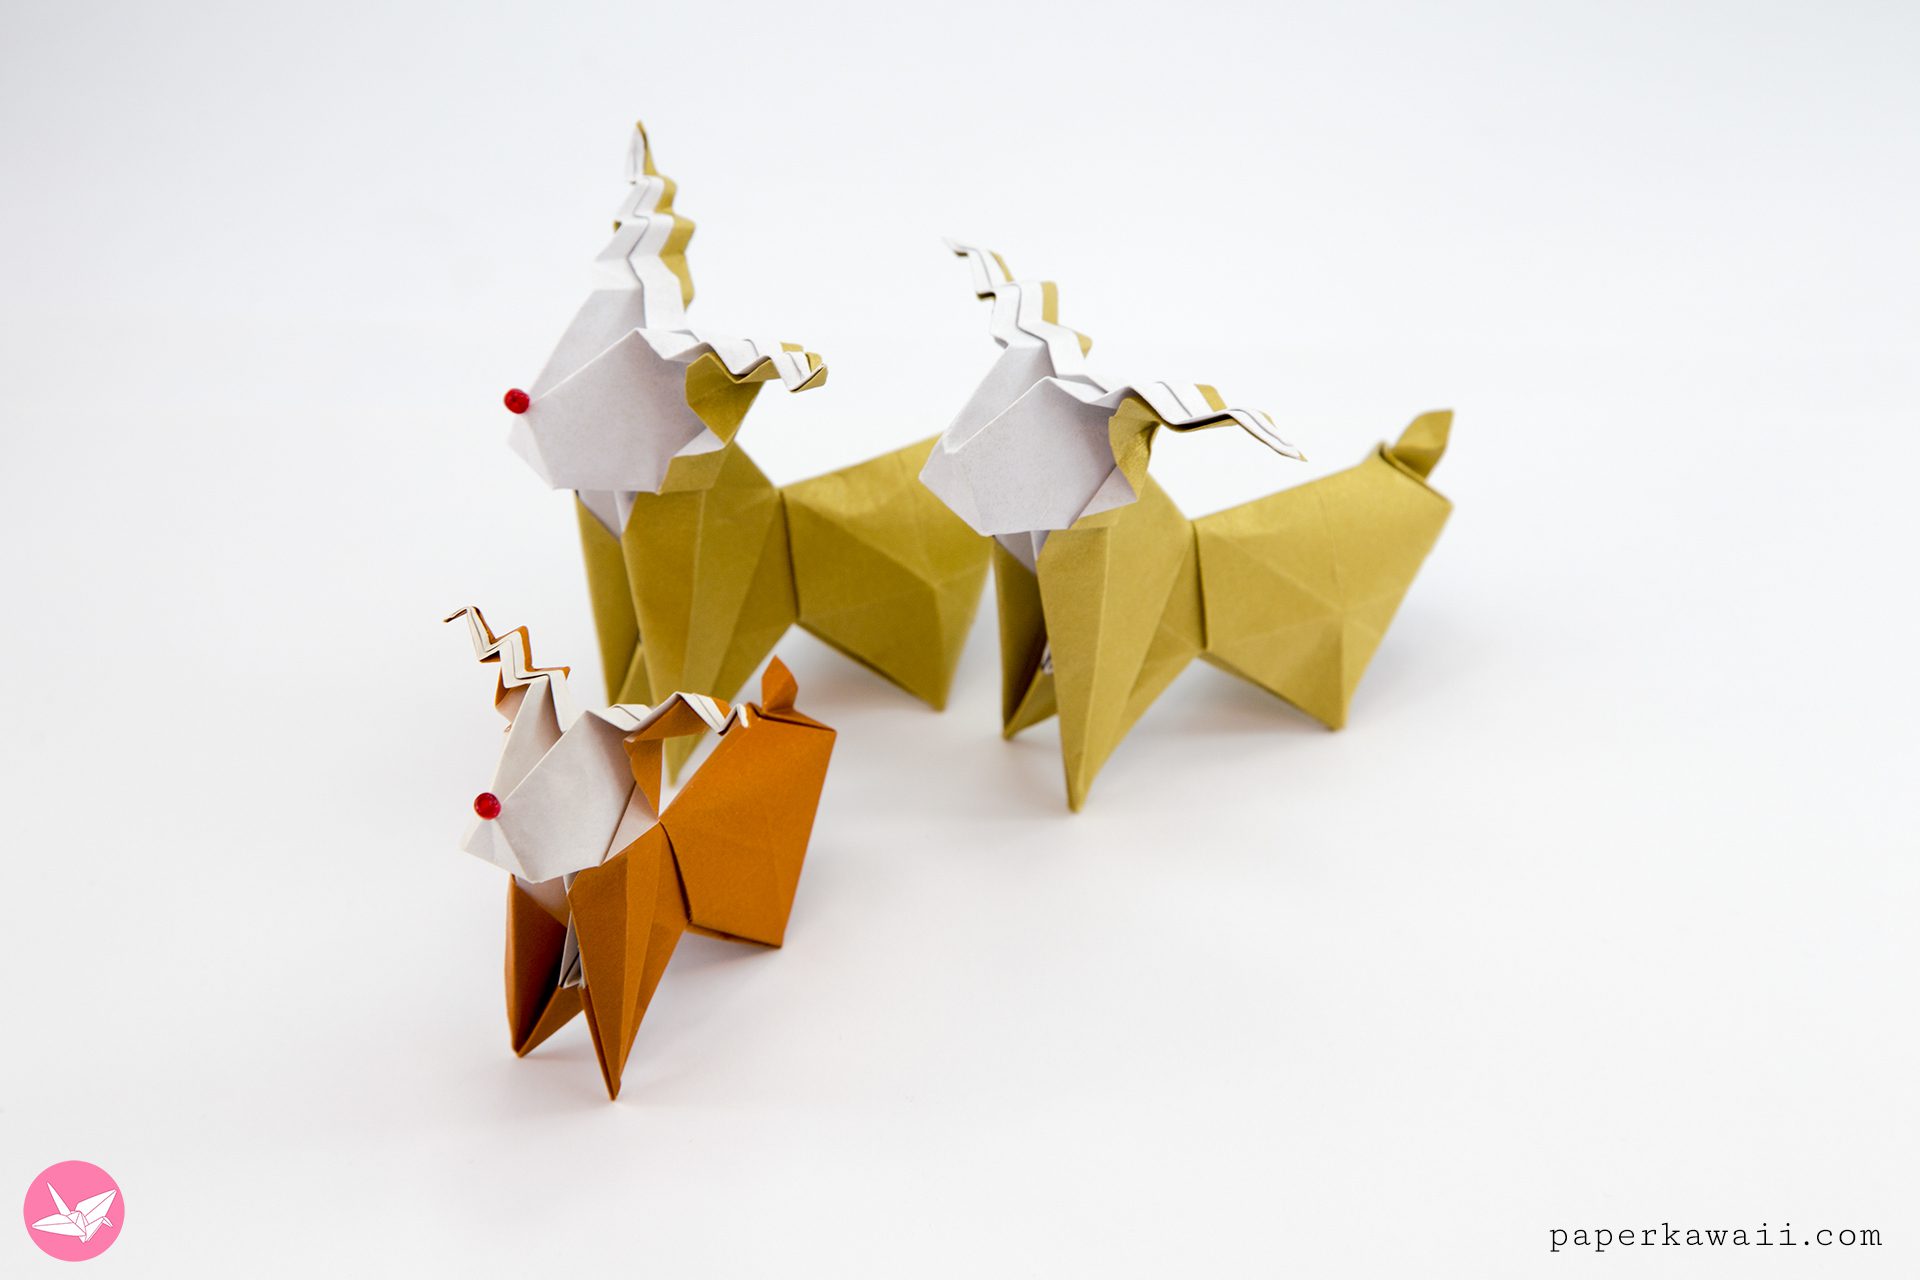 7 Cute and Easy Animal Origami for Kids, Printable Instructions, Videos